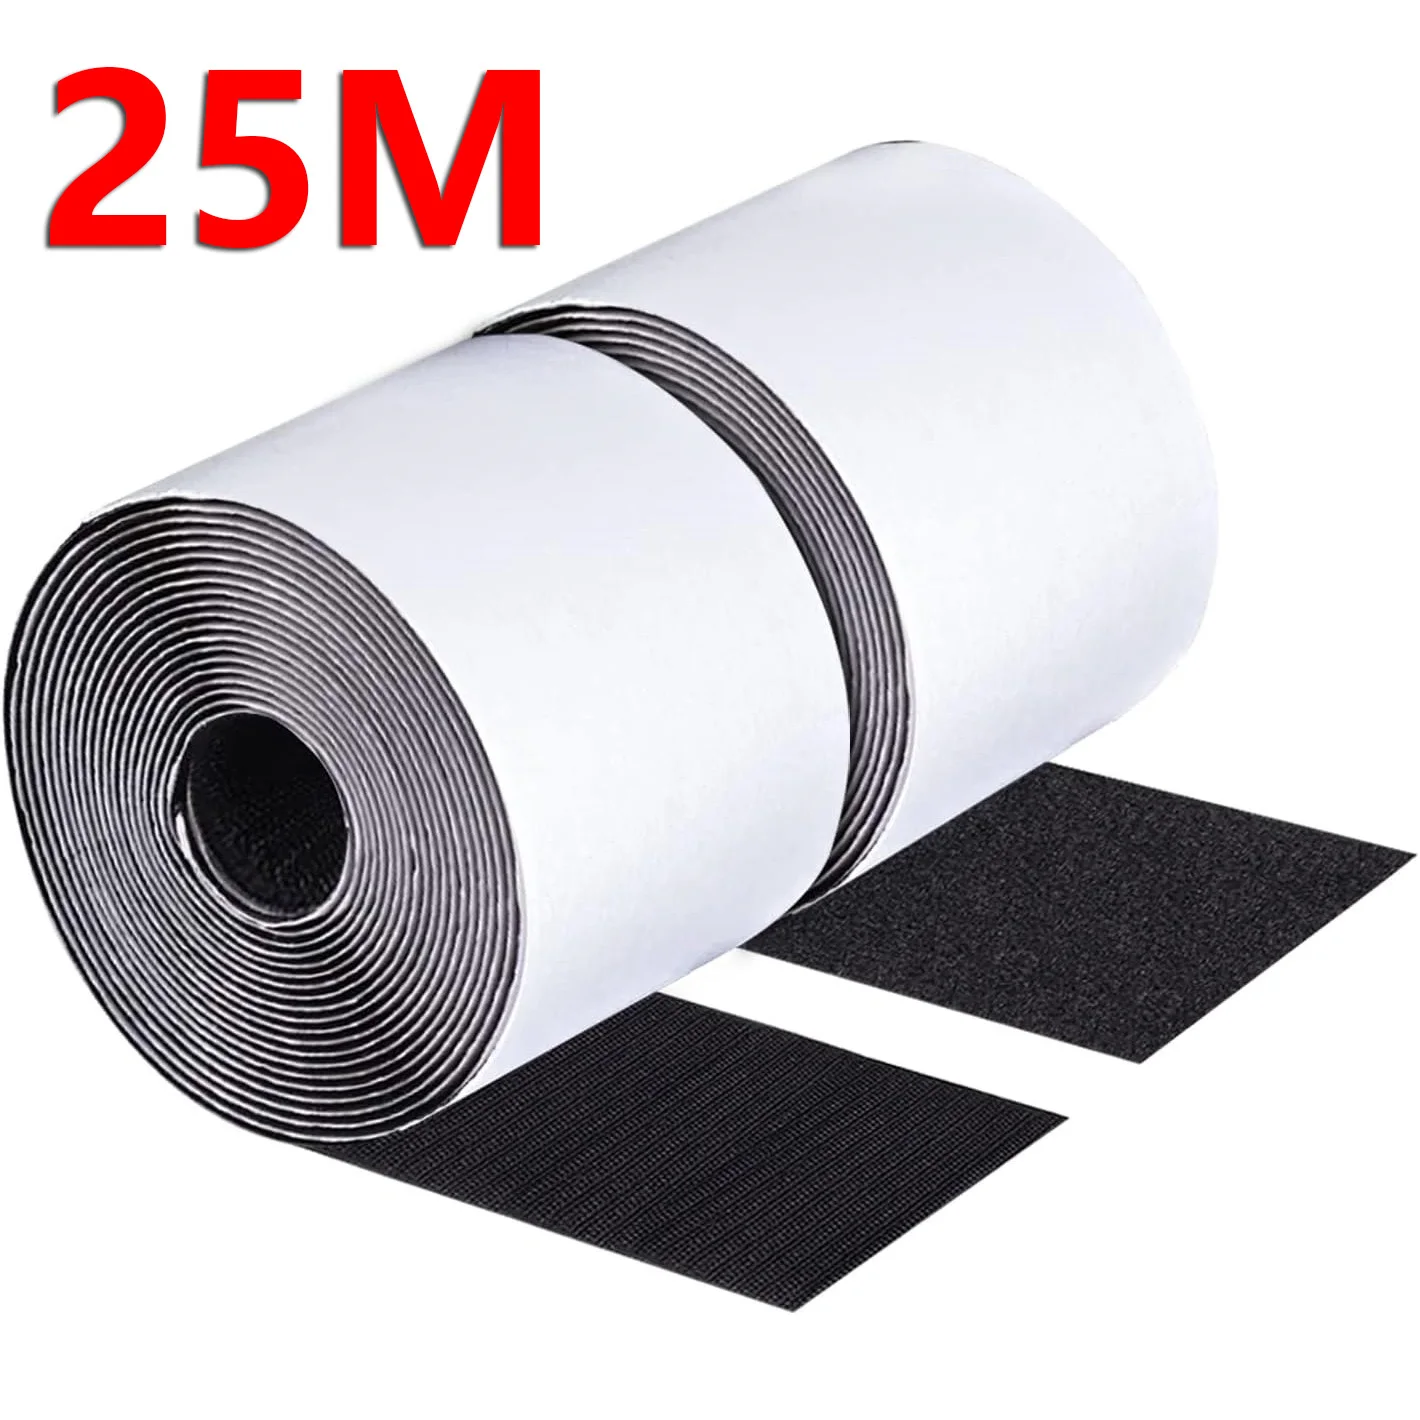 5cm Wide Magic Sticker Scratch Tapes Self-adhesive Hook and Loop Fastener Double Sided Straps with Glue DIY Accessories 1/5/25M